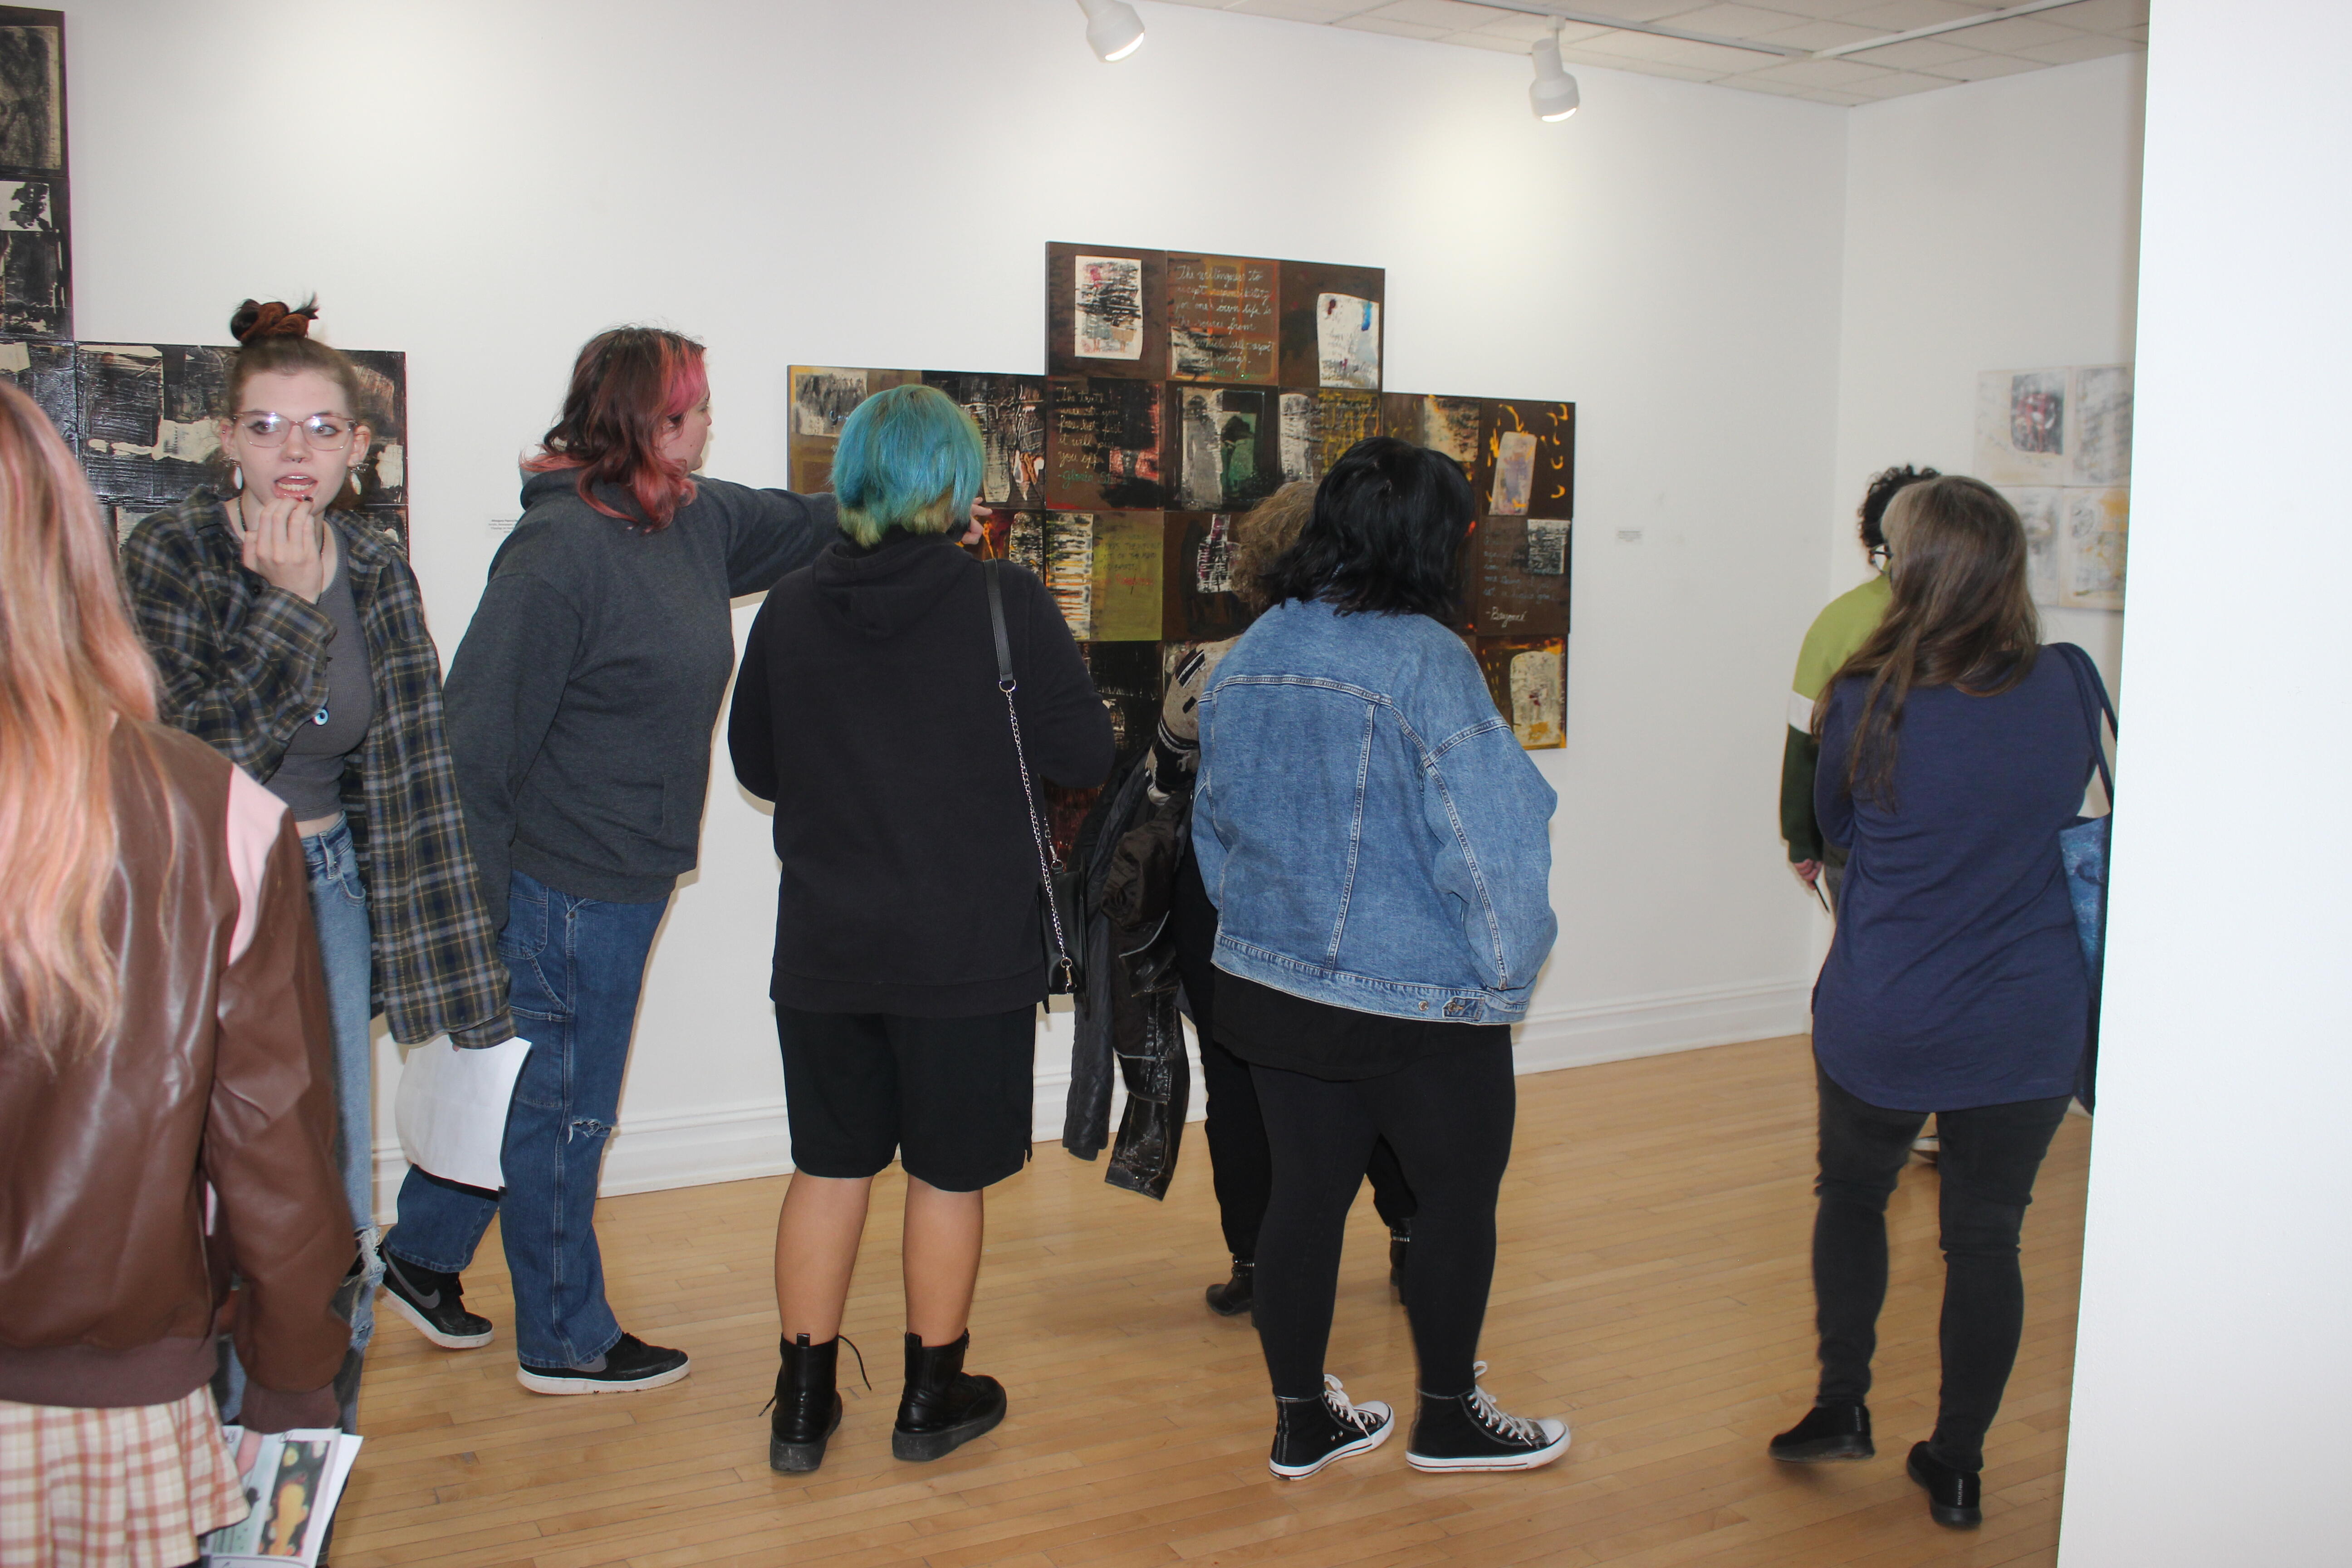 Group of students looking at art